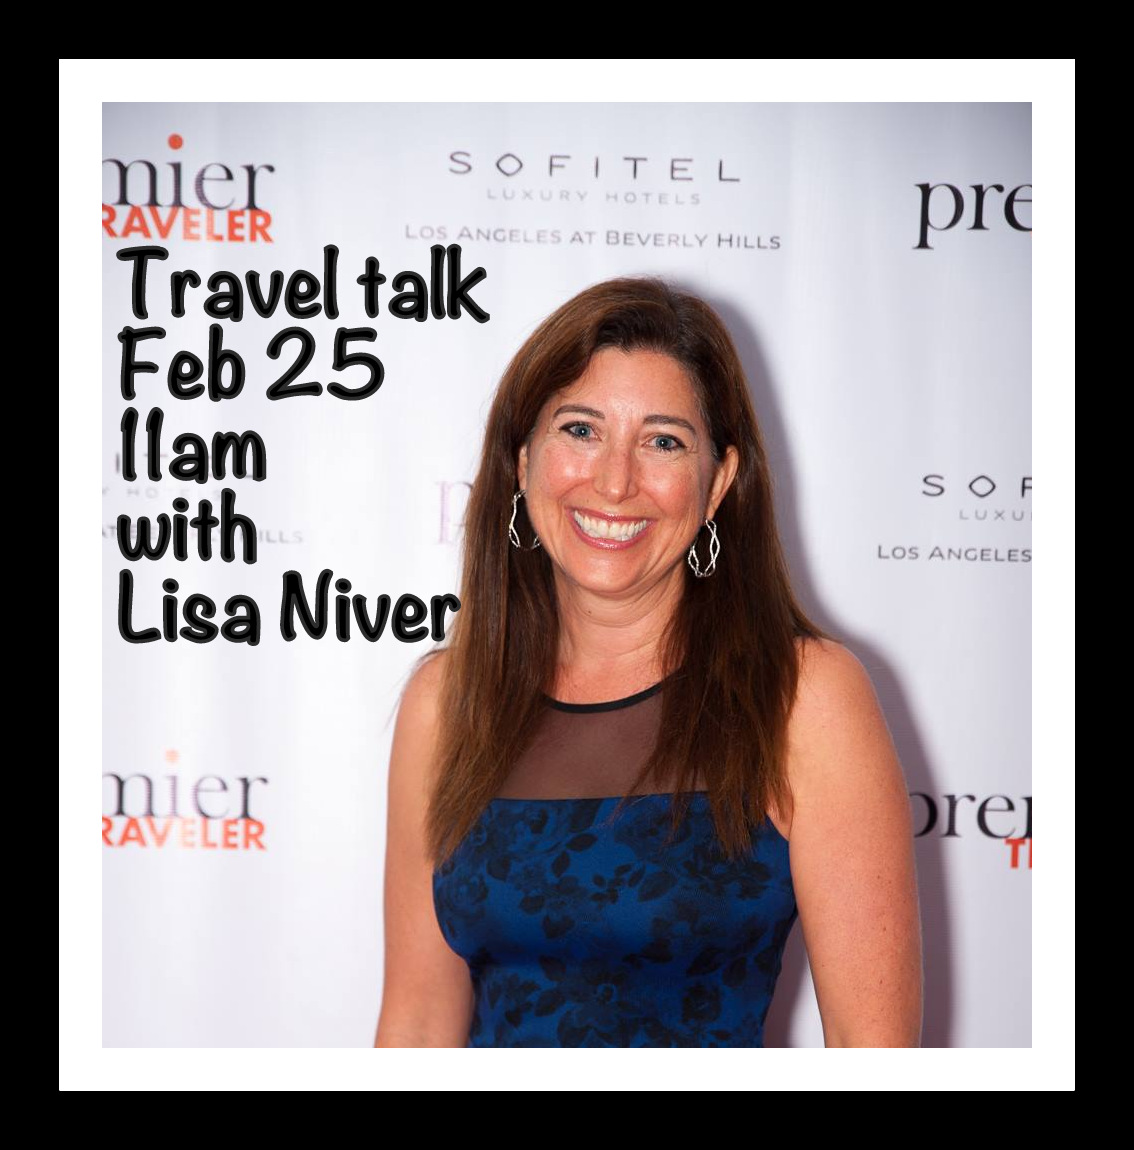 Travel Talk with Lisa Niver